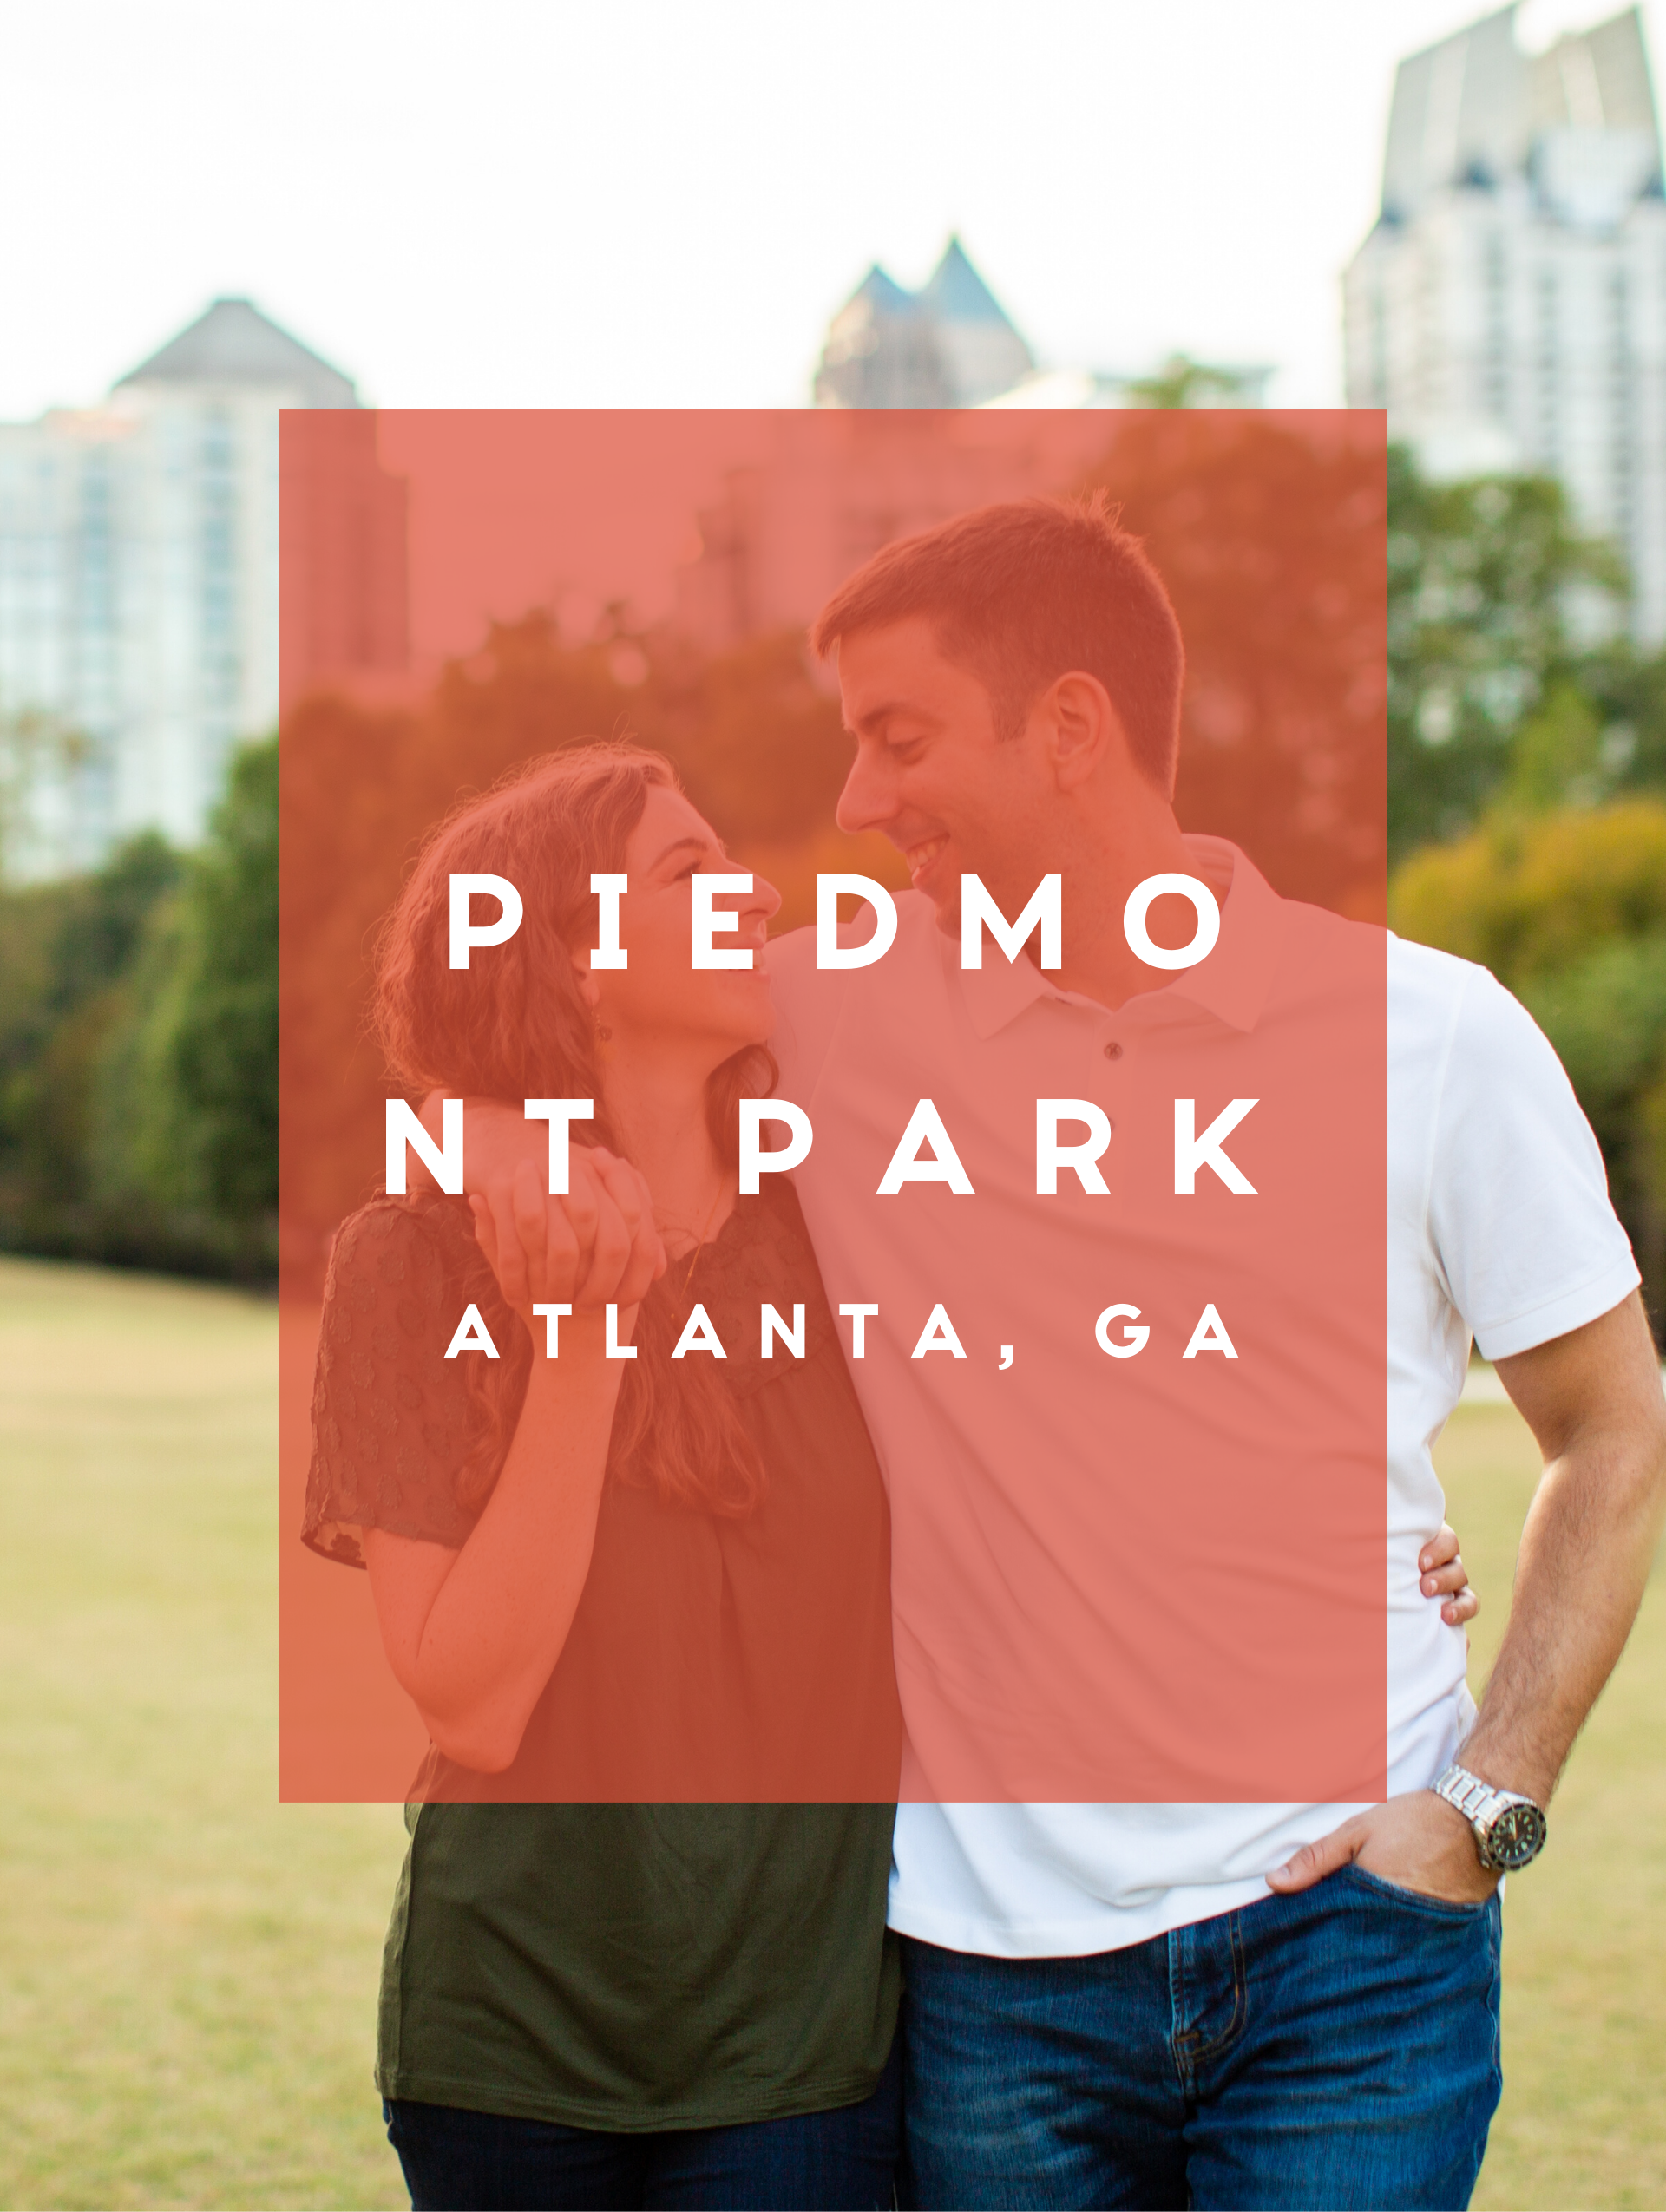 Caroline + John's Piedmont Park engagement session in downtown Atlanta. Stunning views, lots of laughter and excitement for the upcoming marriage!